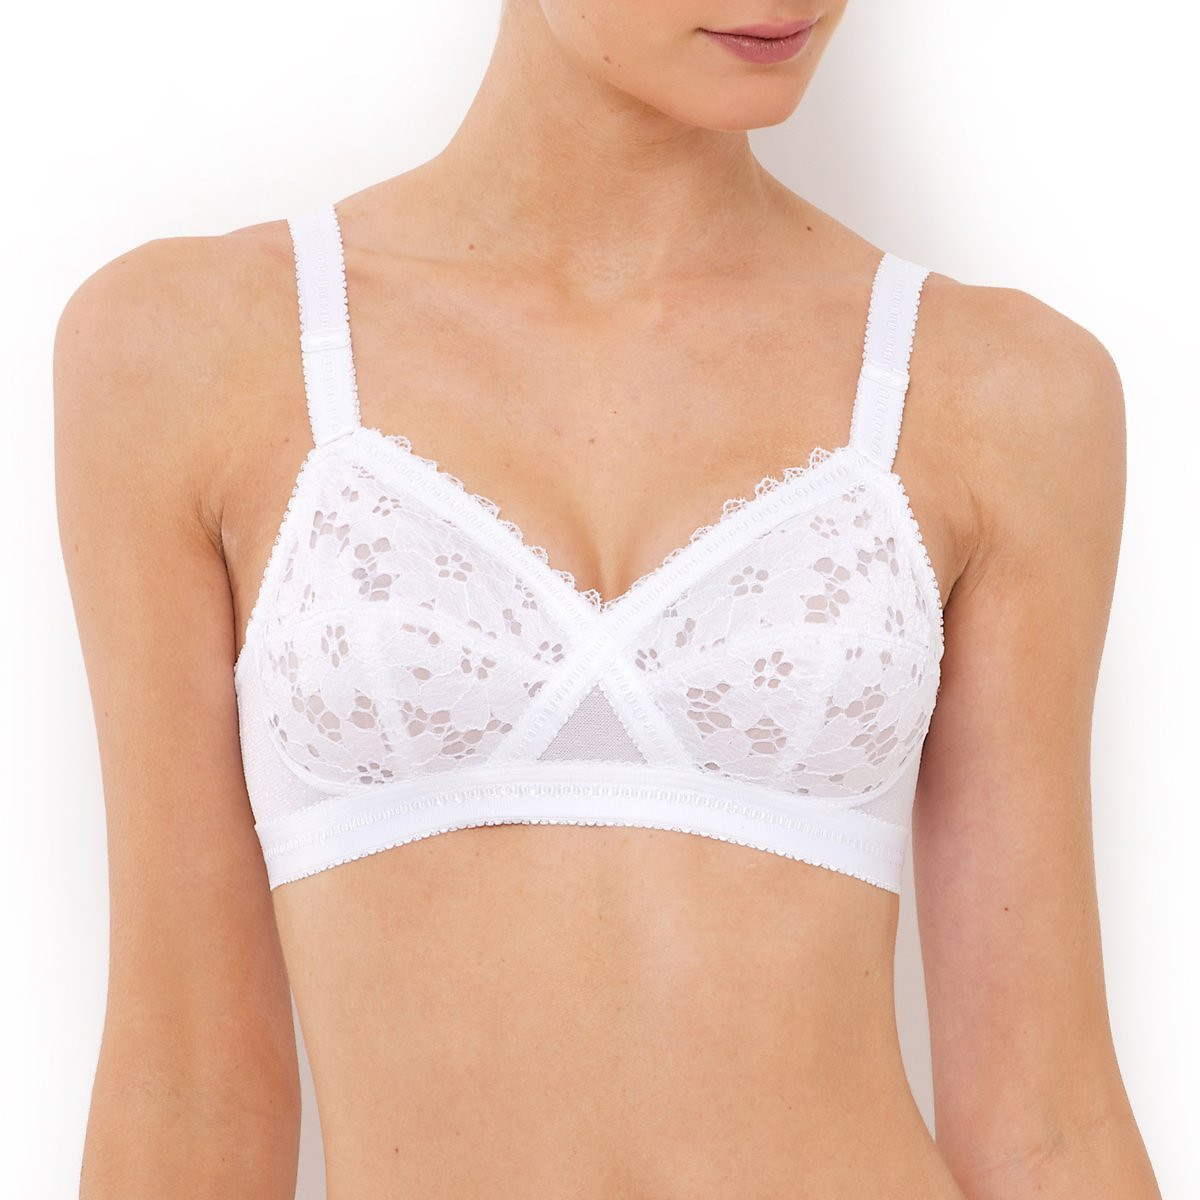 Playtex Cross Your Heart Non-Wired Bra Twin pack P0165 2 x Bras  White